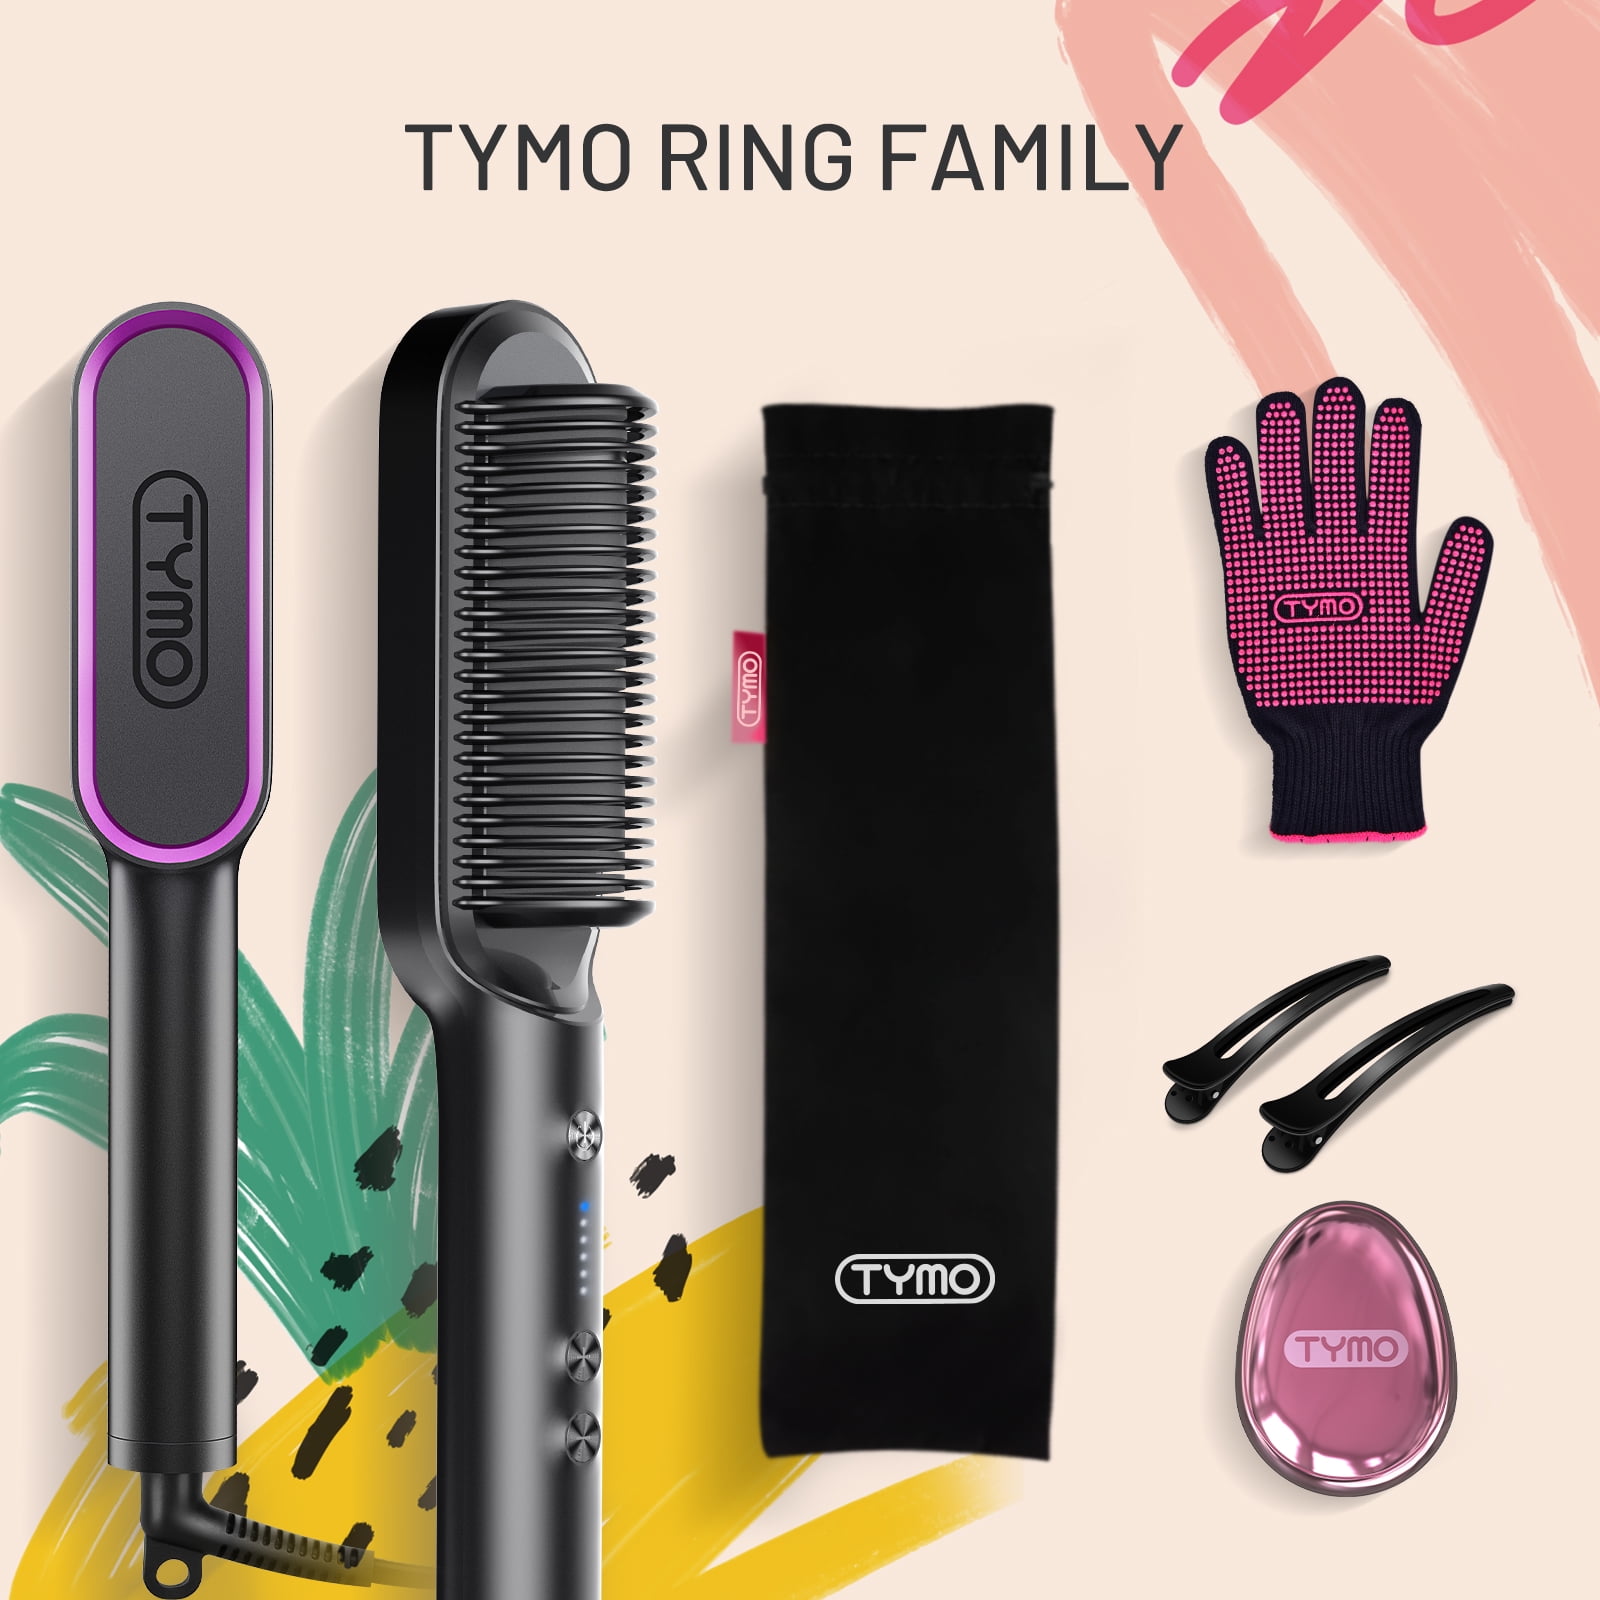 TYMO products » Compare prices and see offers now